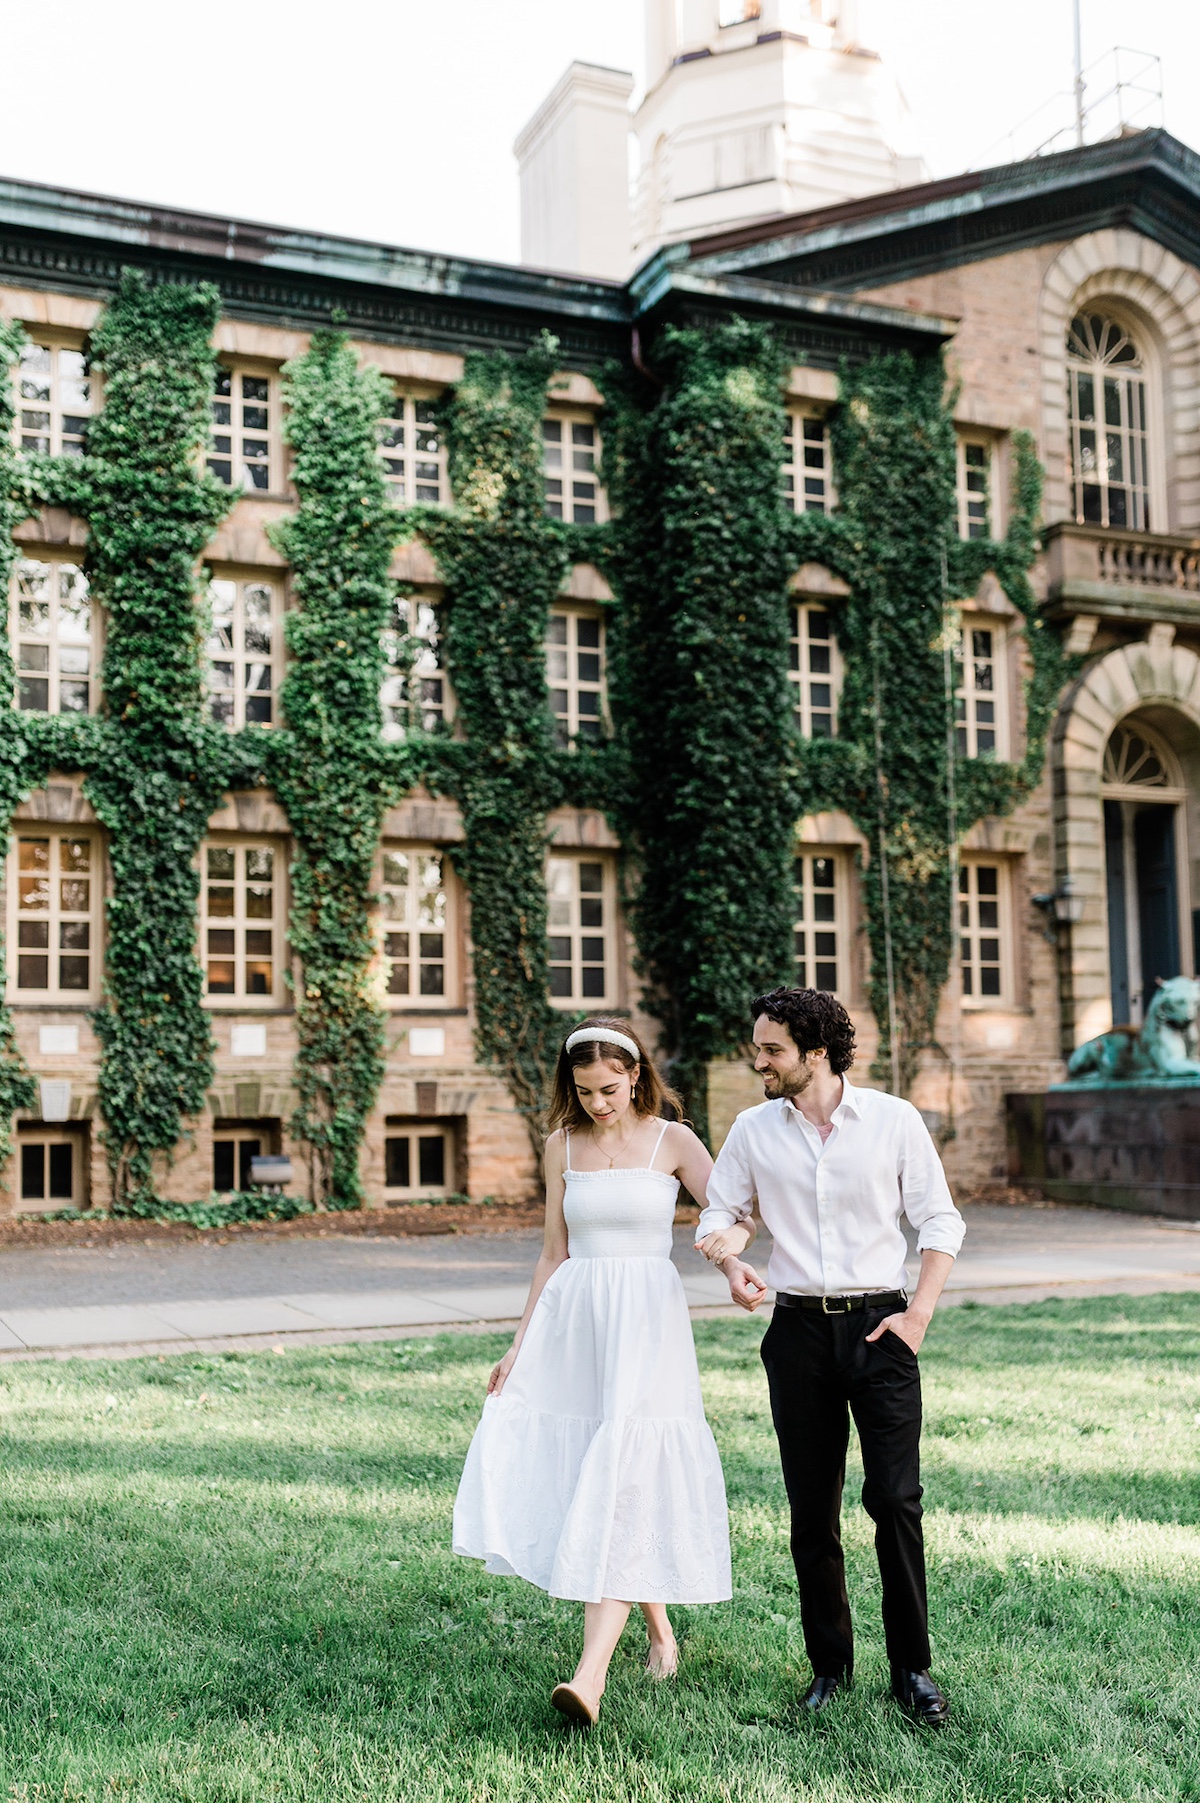 The historic Nassau Hall at Princeton University, a stunning backdrop for the engaged couple's intimate moments.